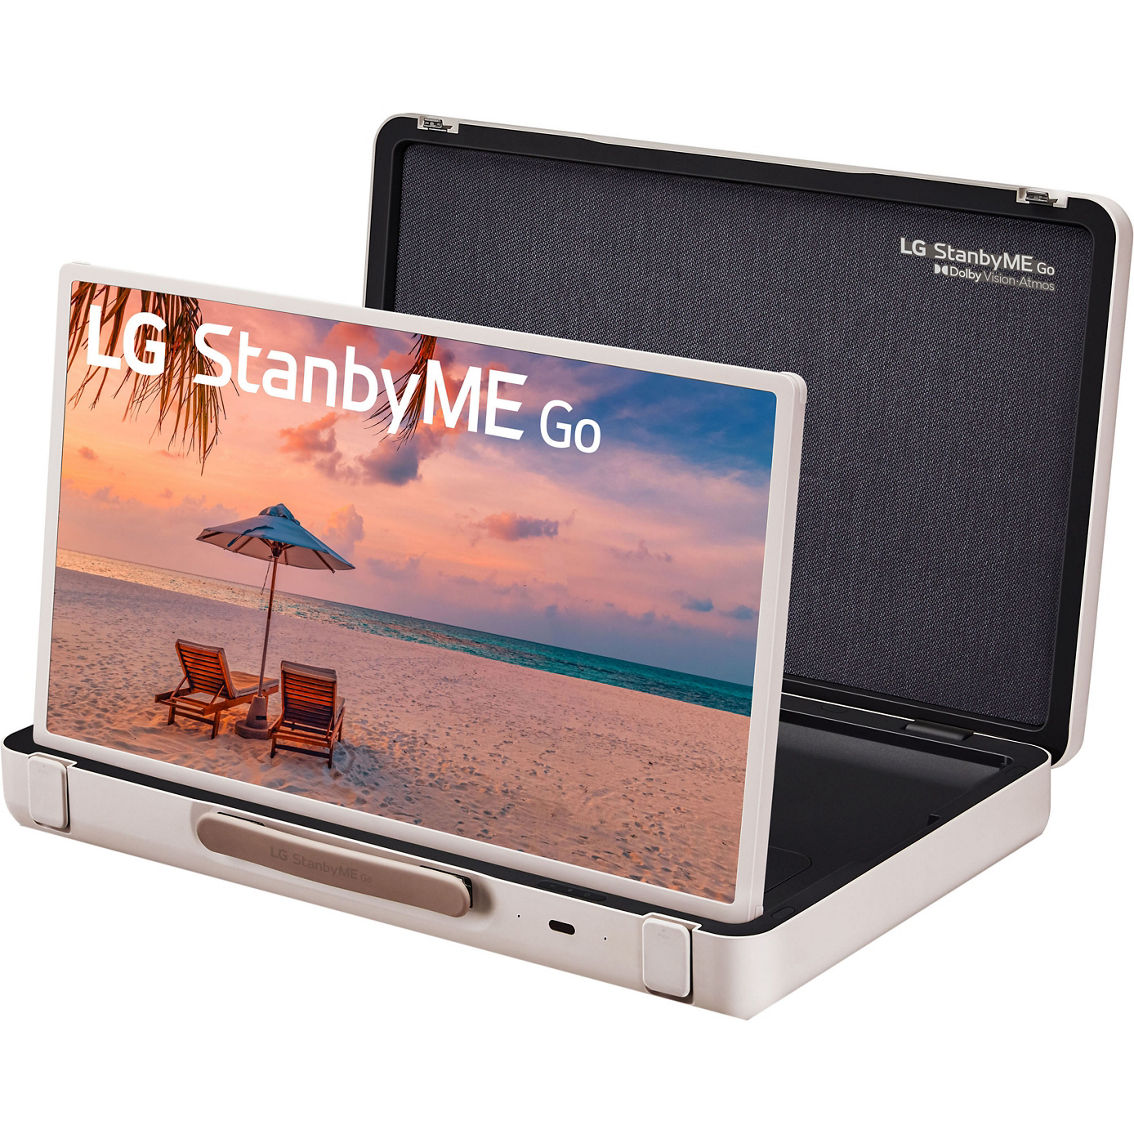 LG 27 in. StanbyME Go Portable Smart LED TV with Briefcase 27LX5QKNA - Image 3 of 10